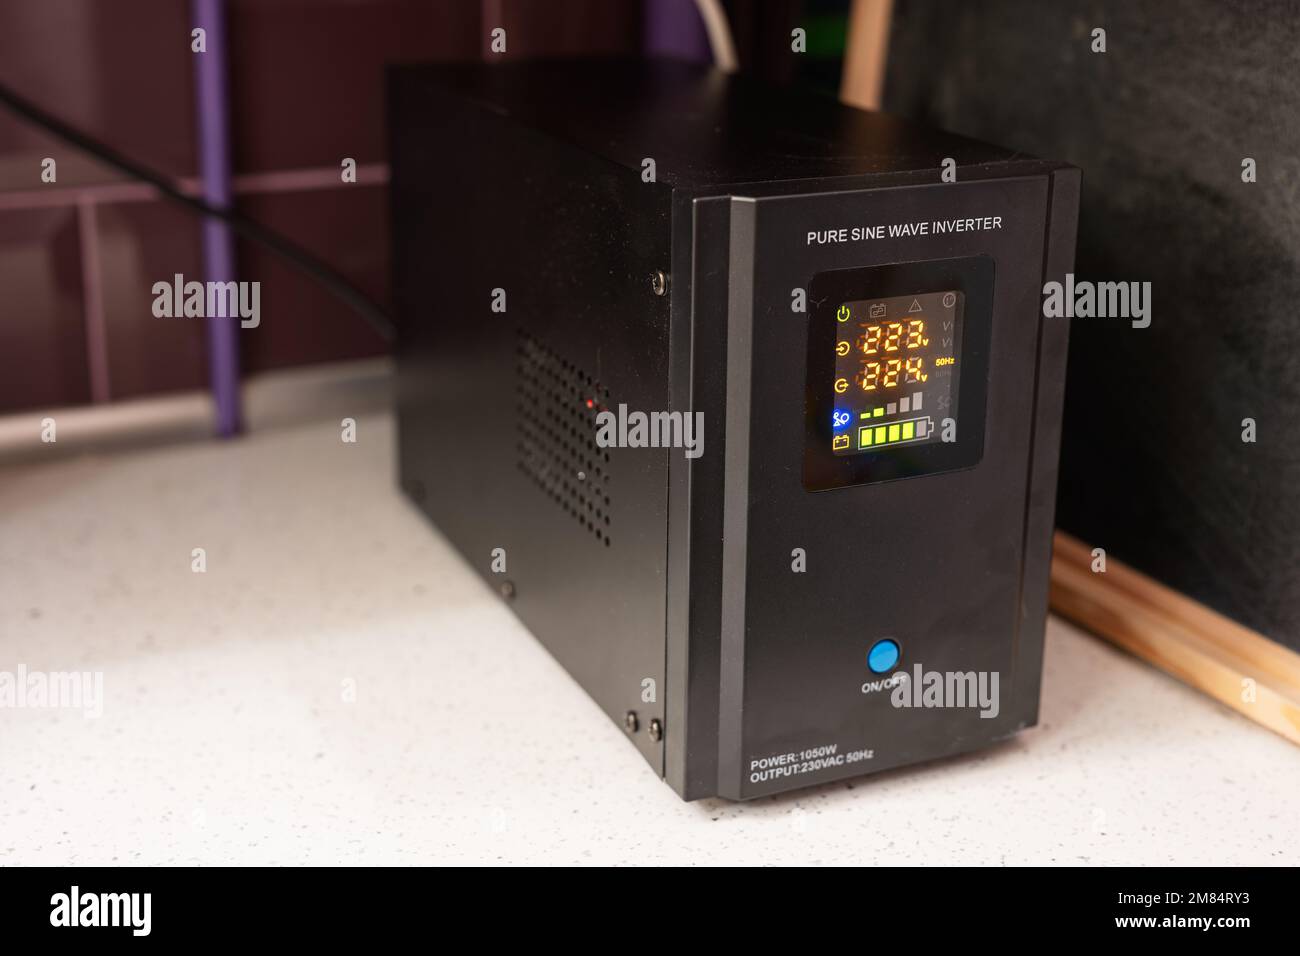 Pure sine wave inverter. Backup Power UPS 1000 W with stabilizer for home. Stock Photo